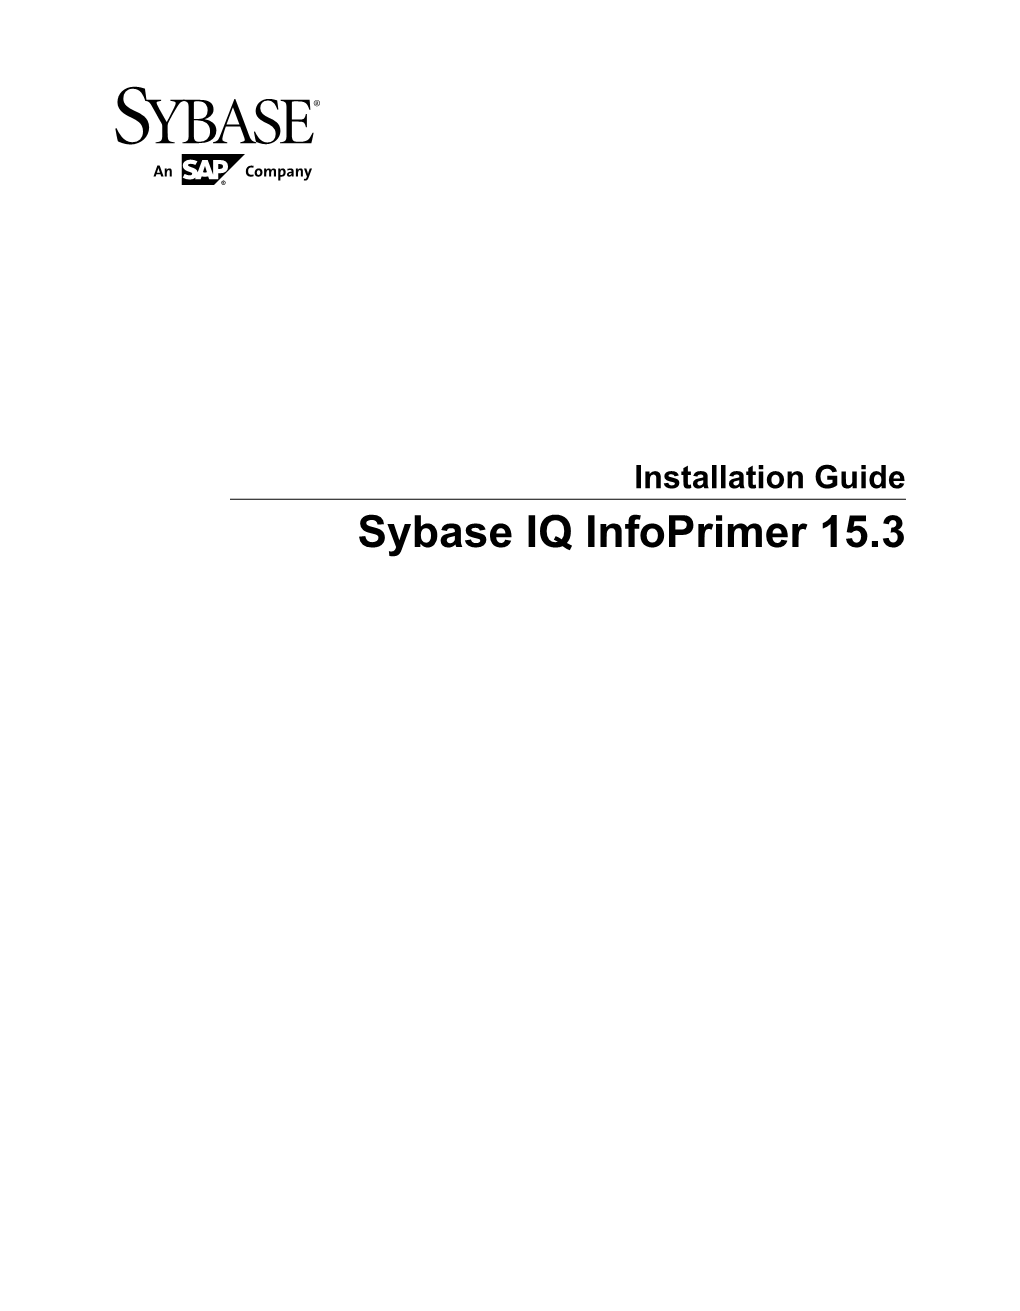 Installation Guide Sybase IQ Infoprimer 15.3 DOCUMENT ID: DC01642-01-1530-01 LAST REVISED: May 2011 Copyright © 2011 by Sybase, Inc